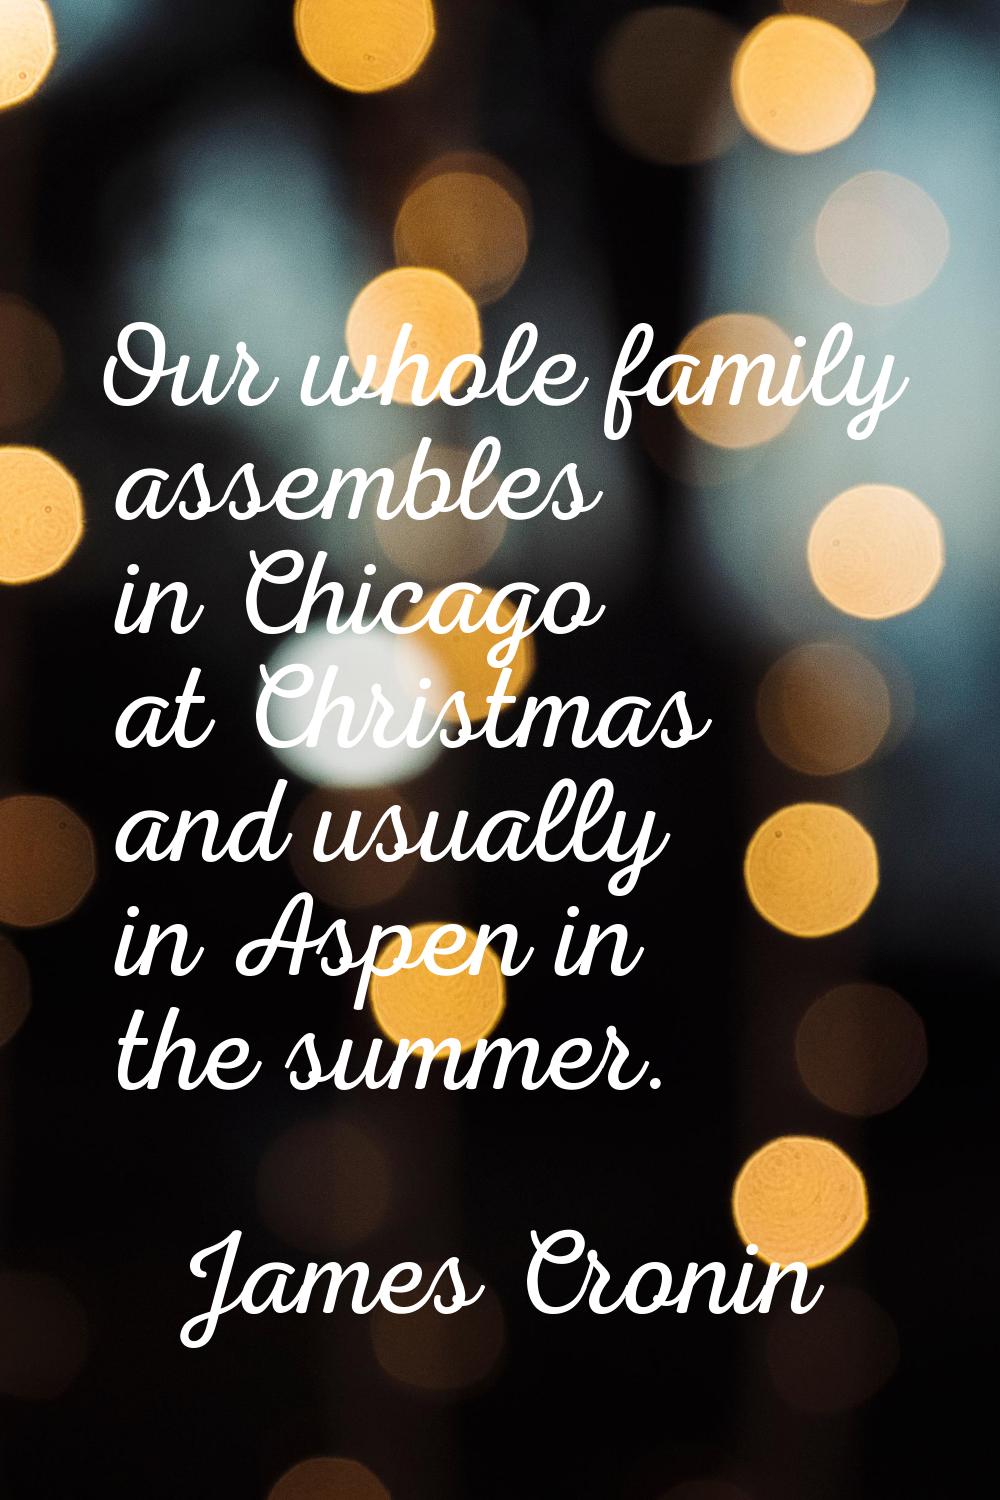 Our whole family assembles in Chicago at Christmas and usually in Aspen in the summer.